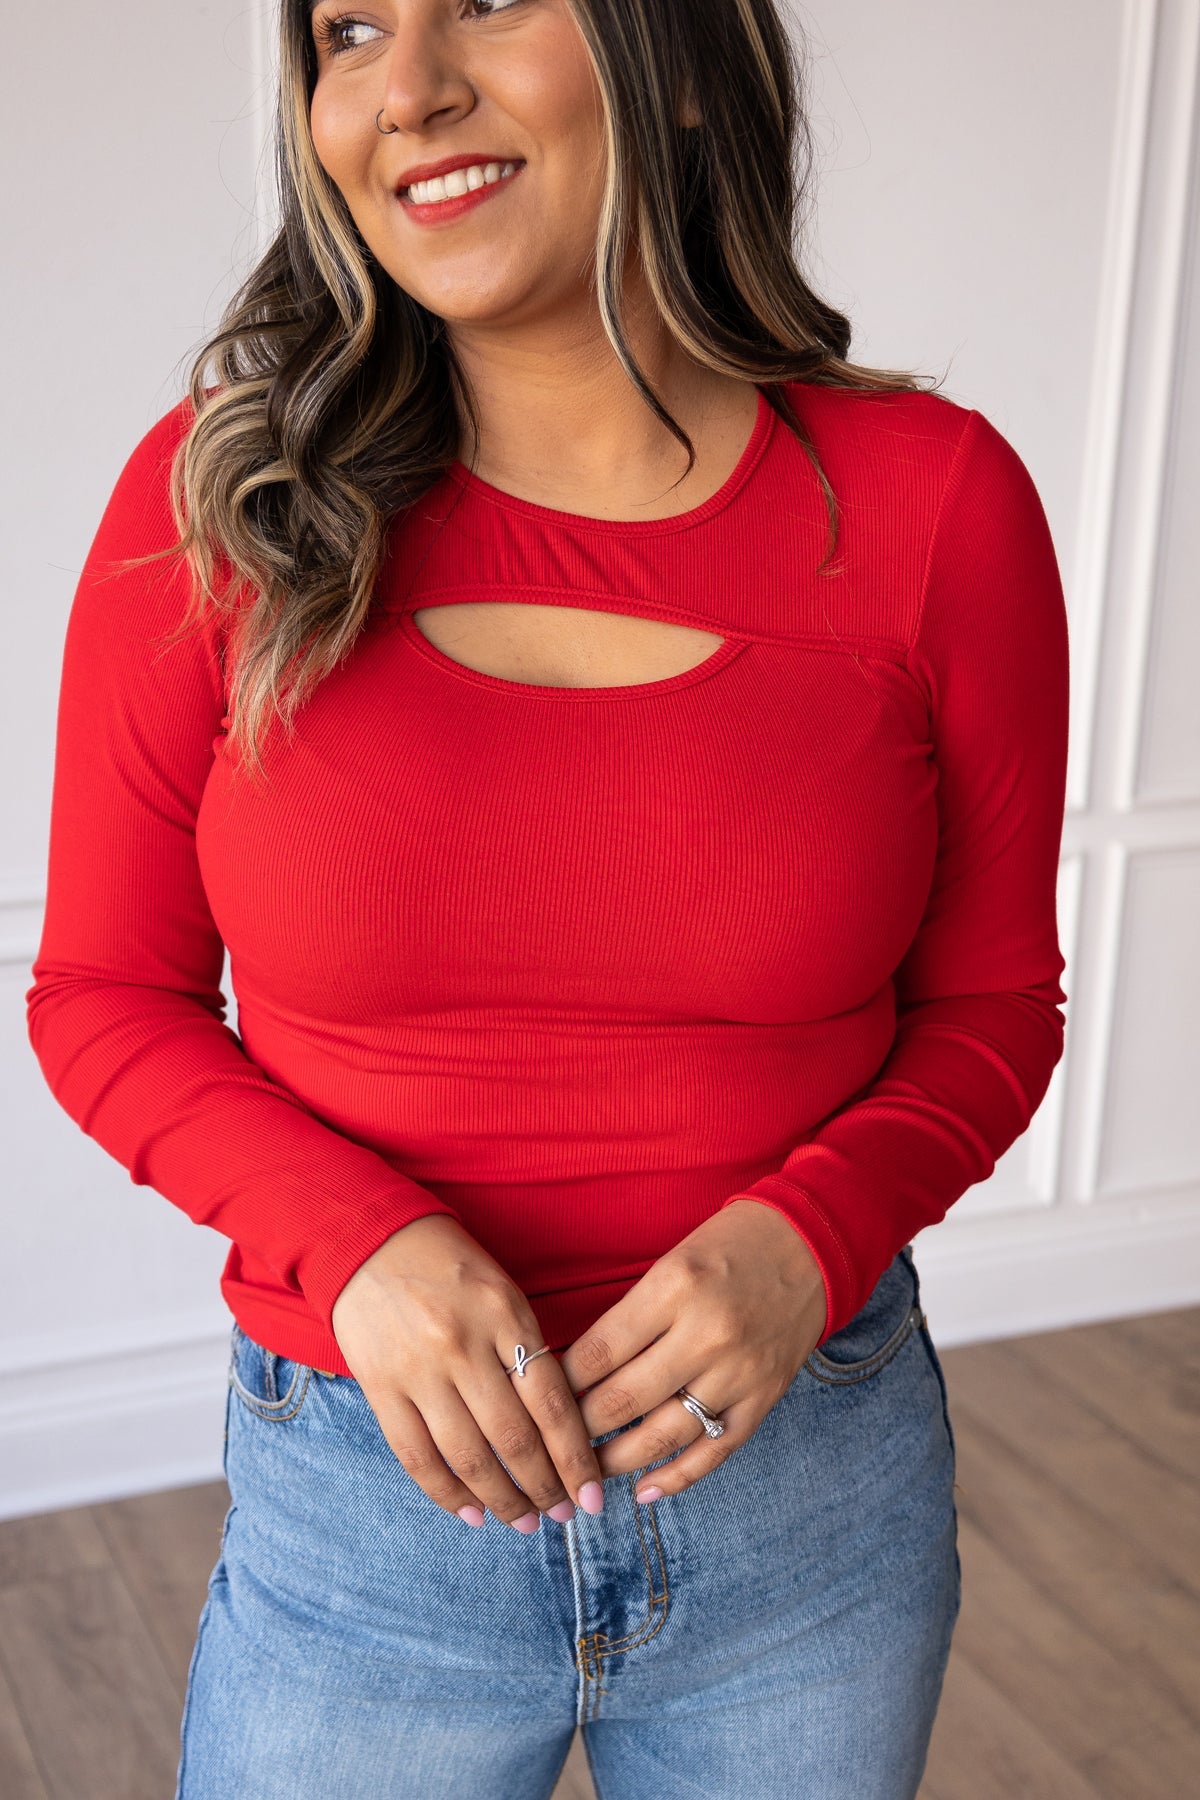 The Wrapped in Red Top